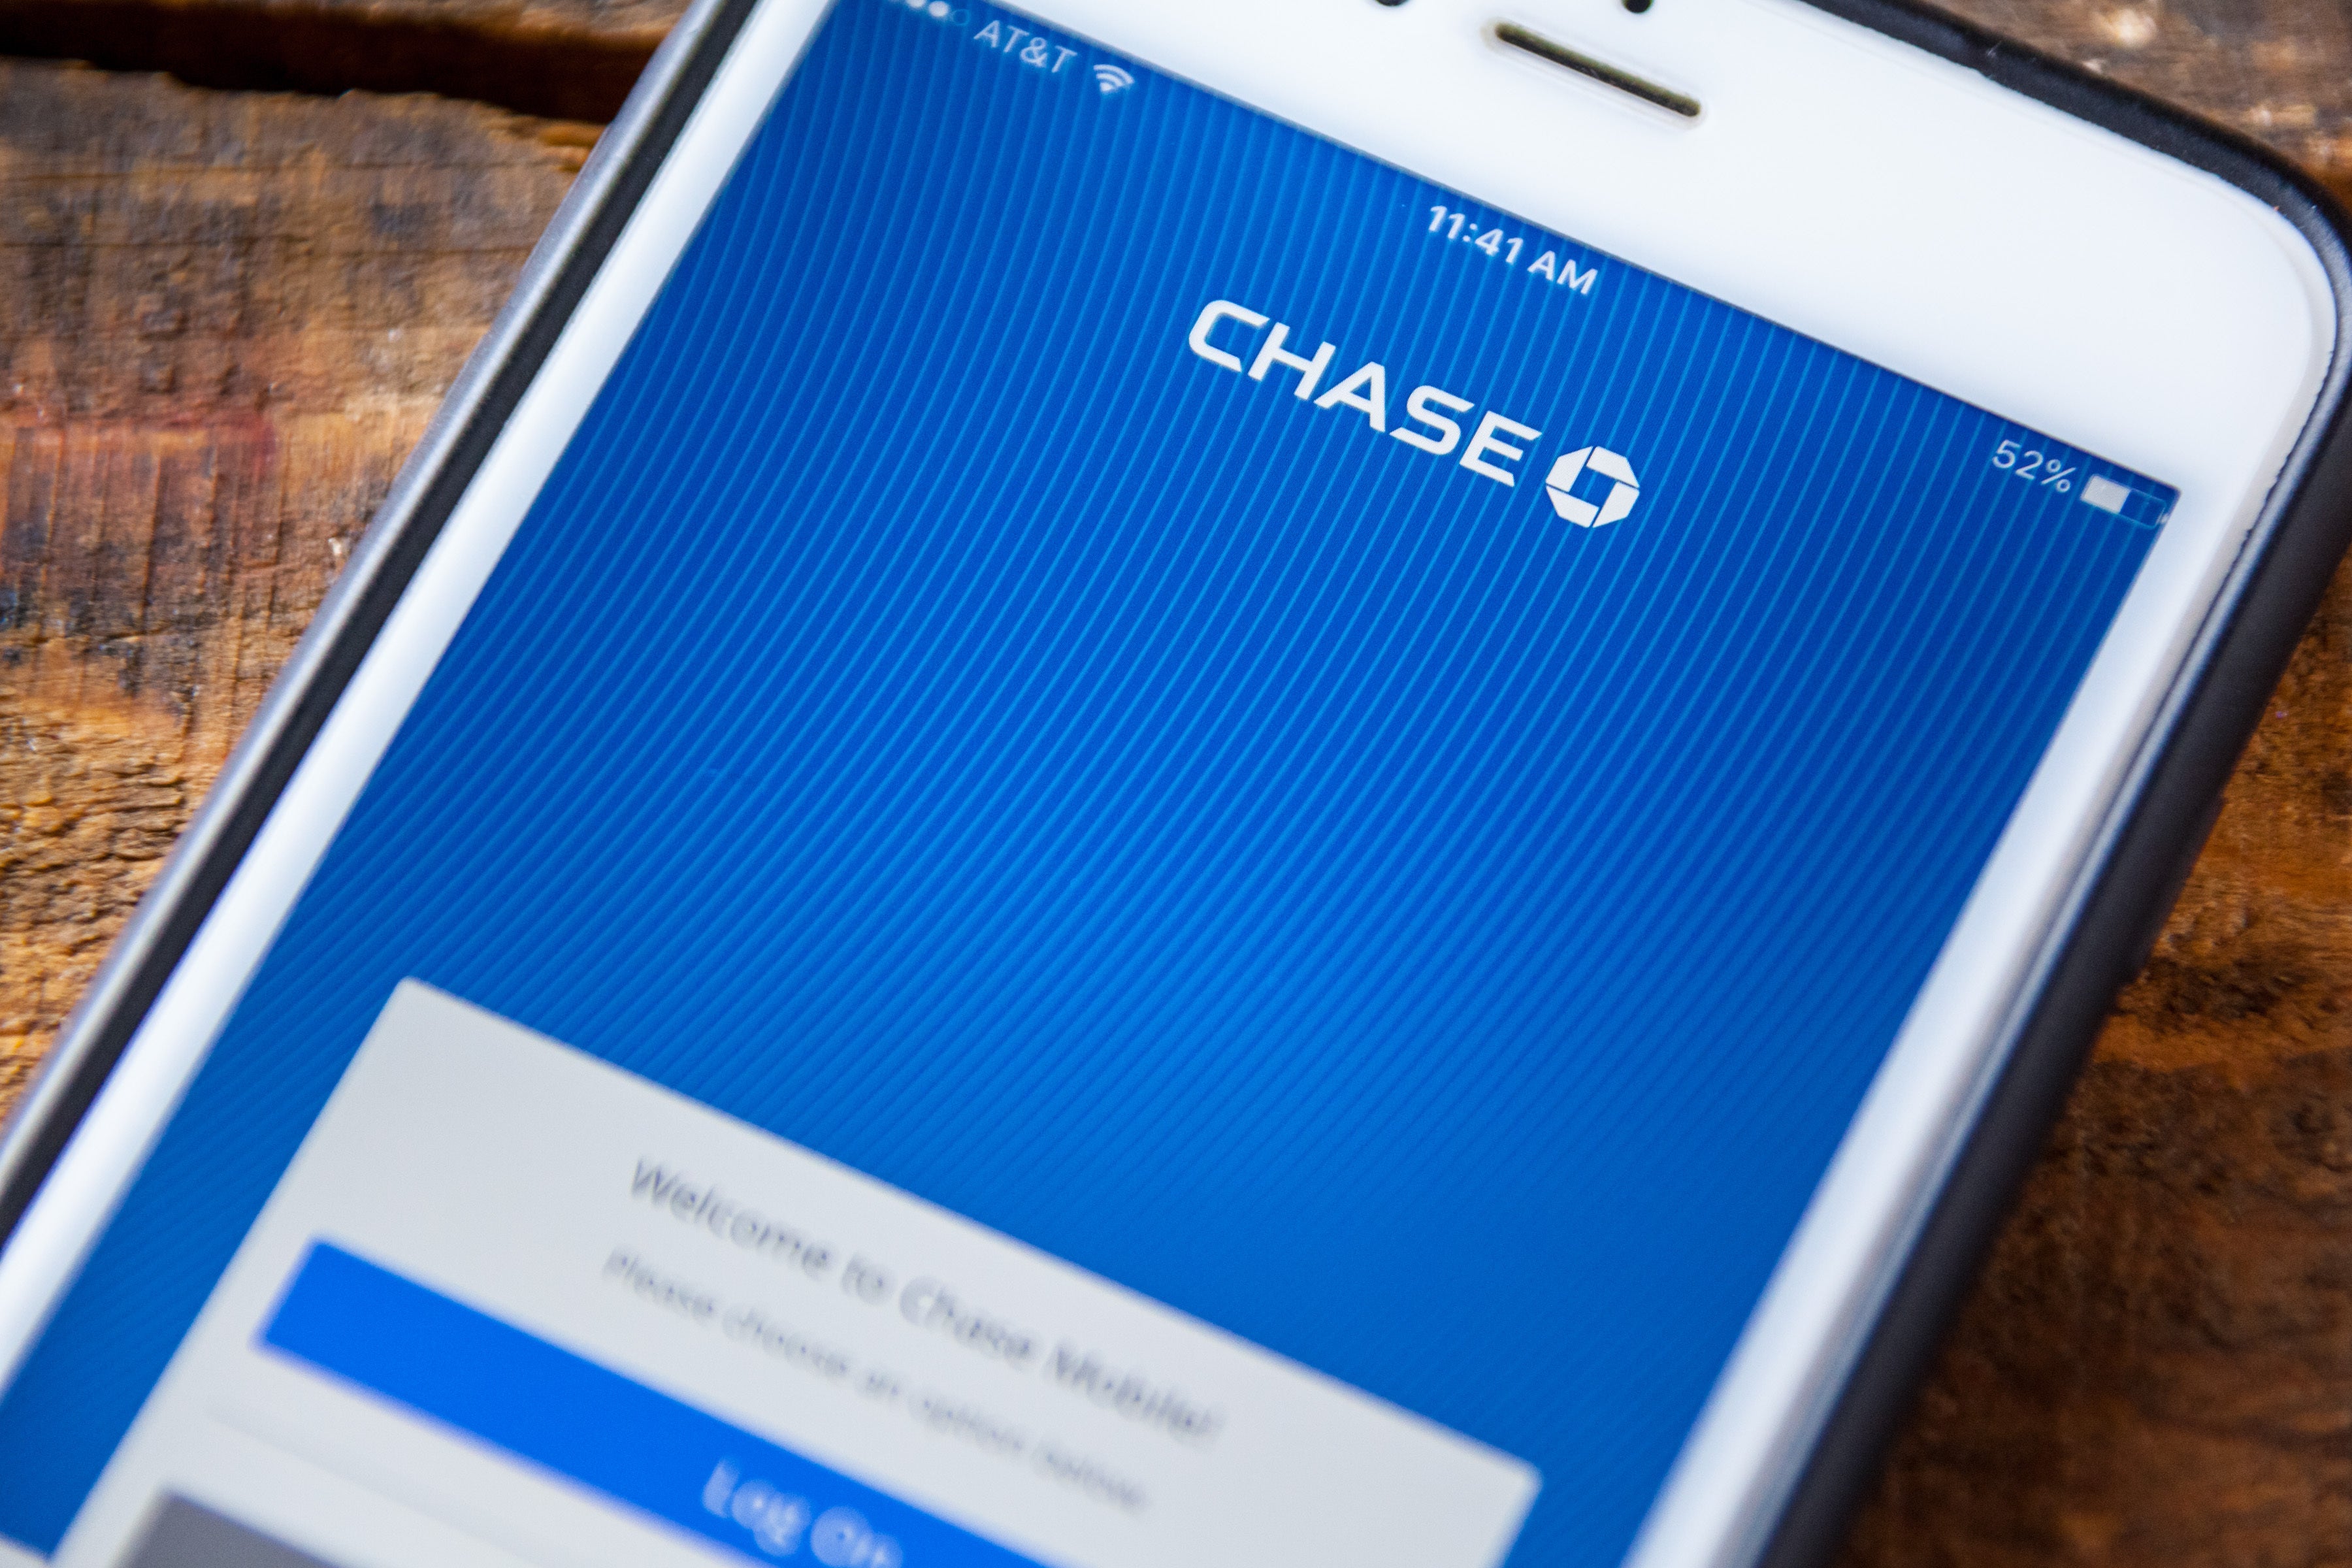 download chase mobile banking